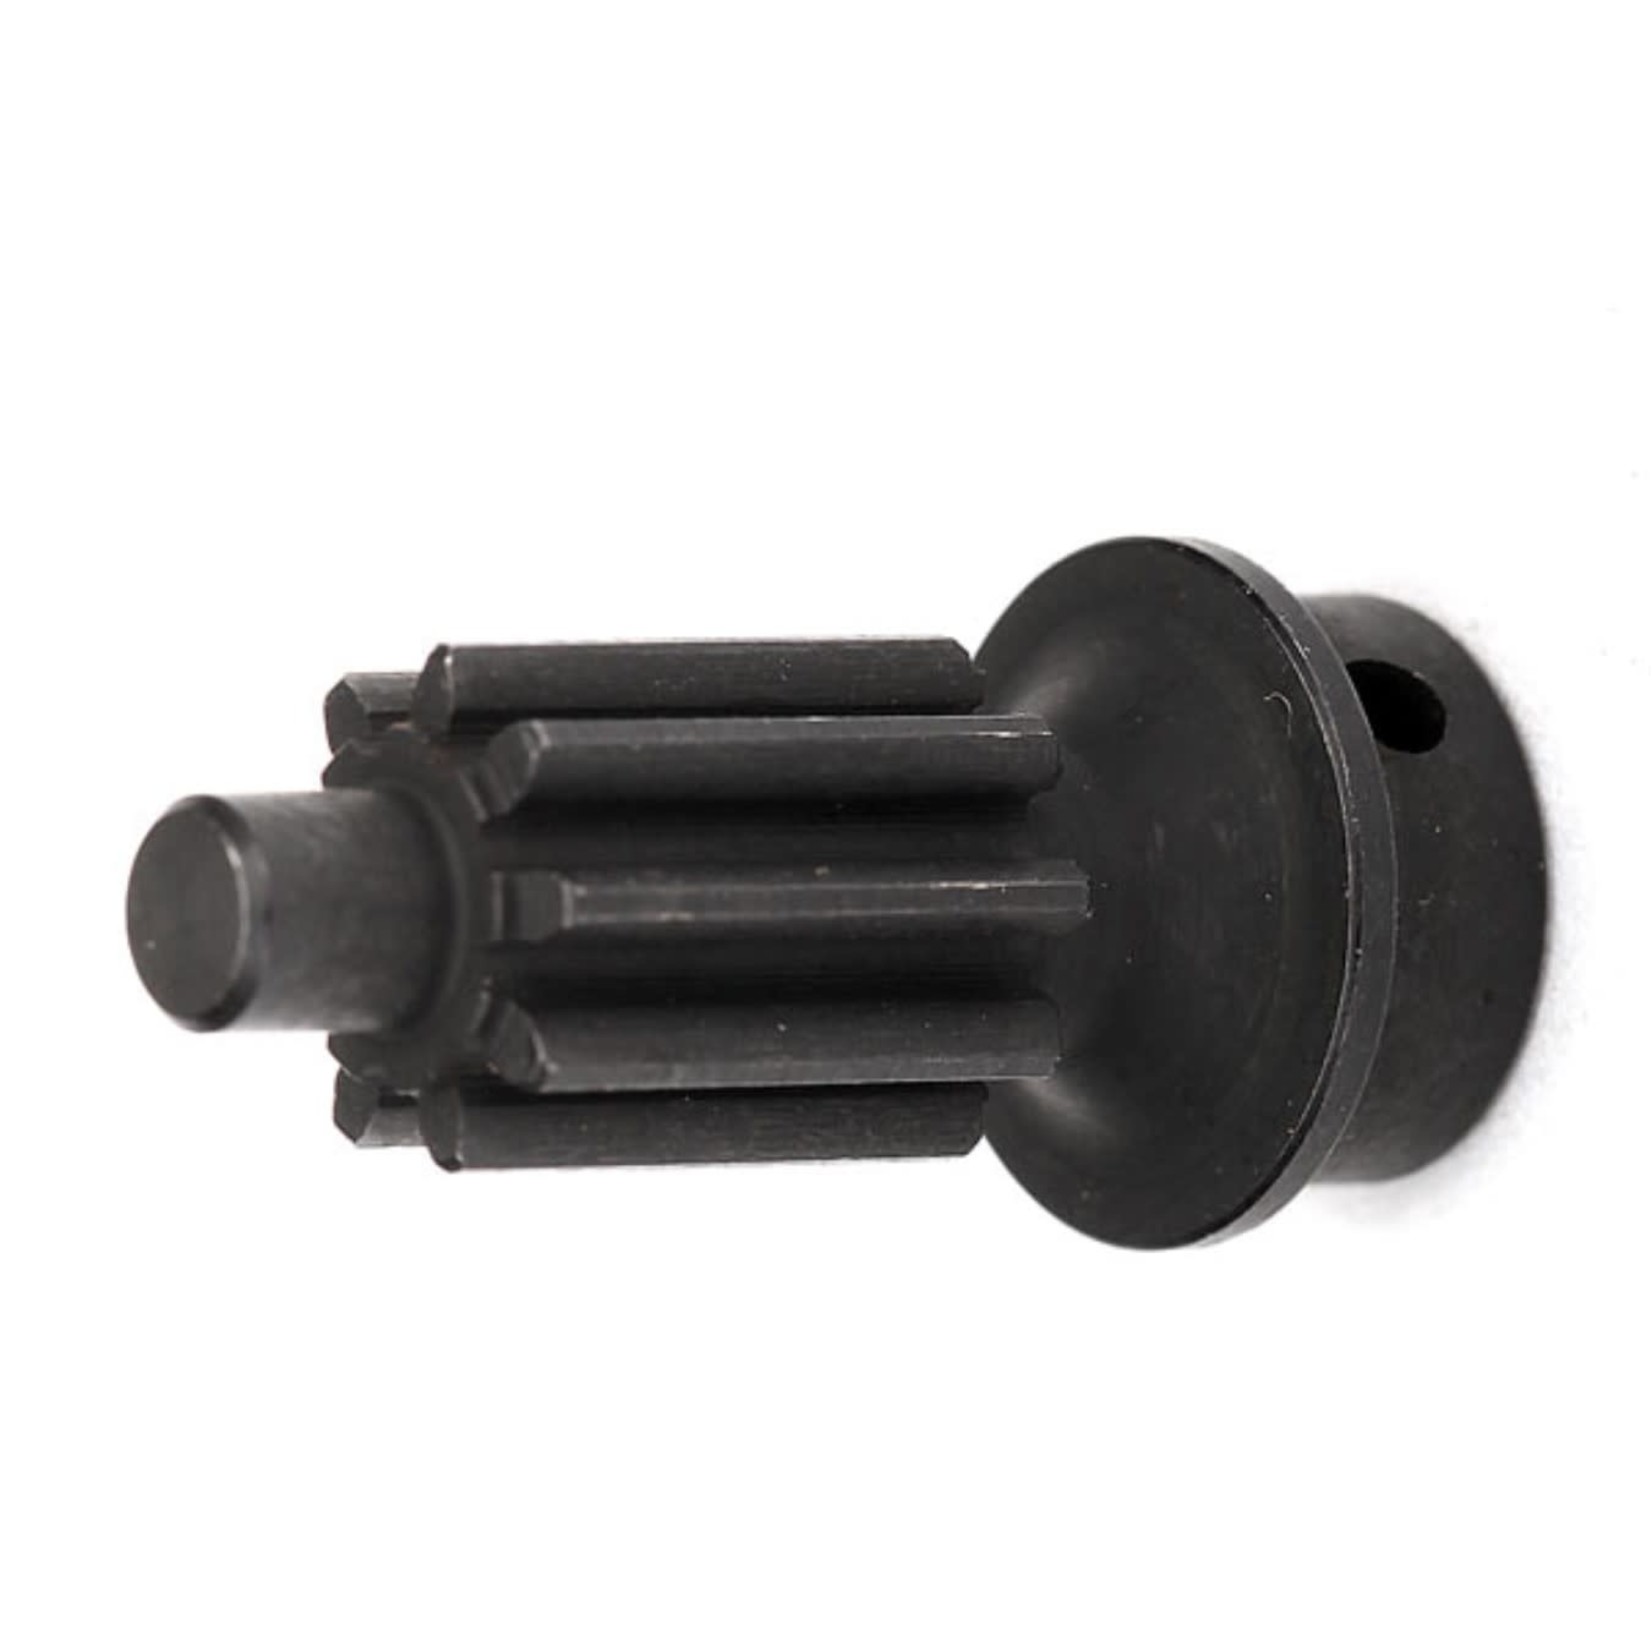 Traxxas TRX-4 Portal drive input gear, rear (machined) (left or right) (requires #8063 rear axle)